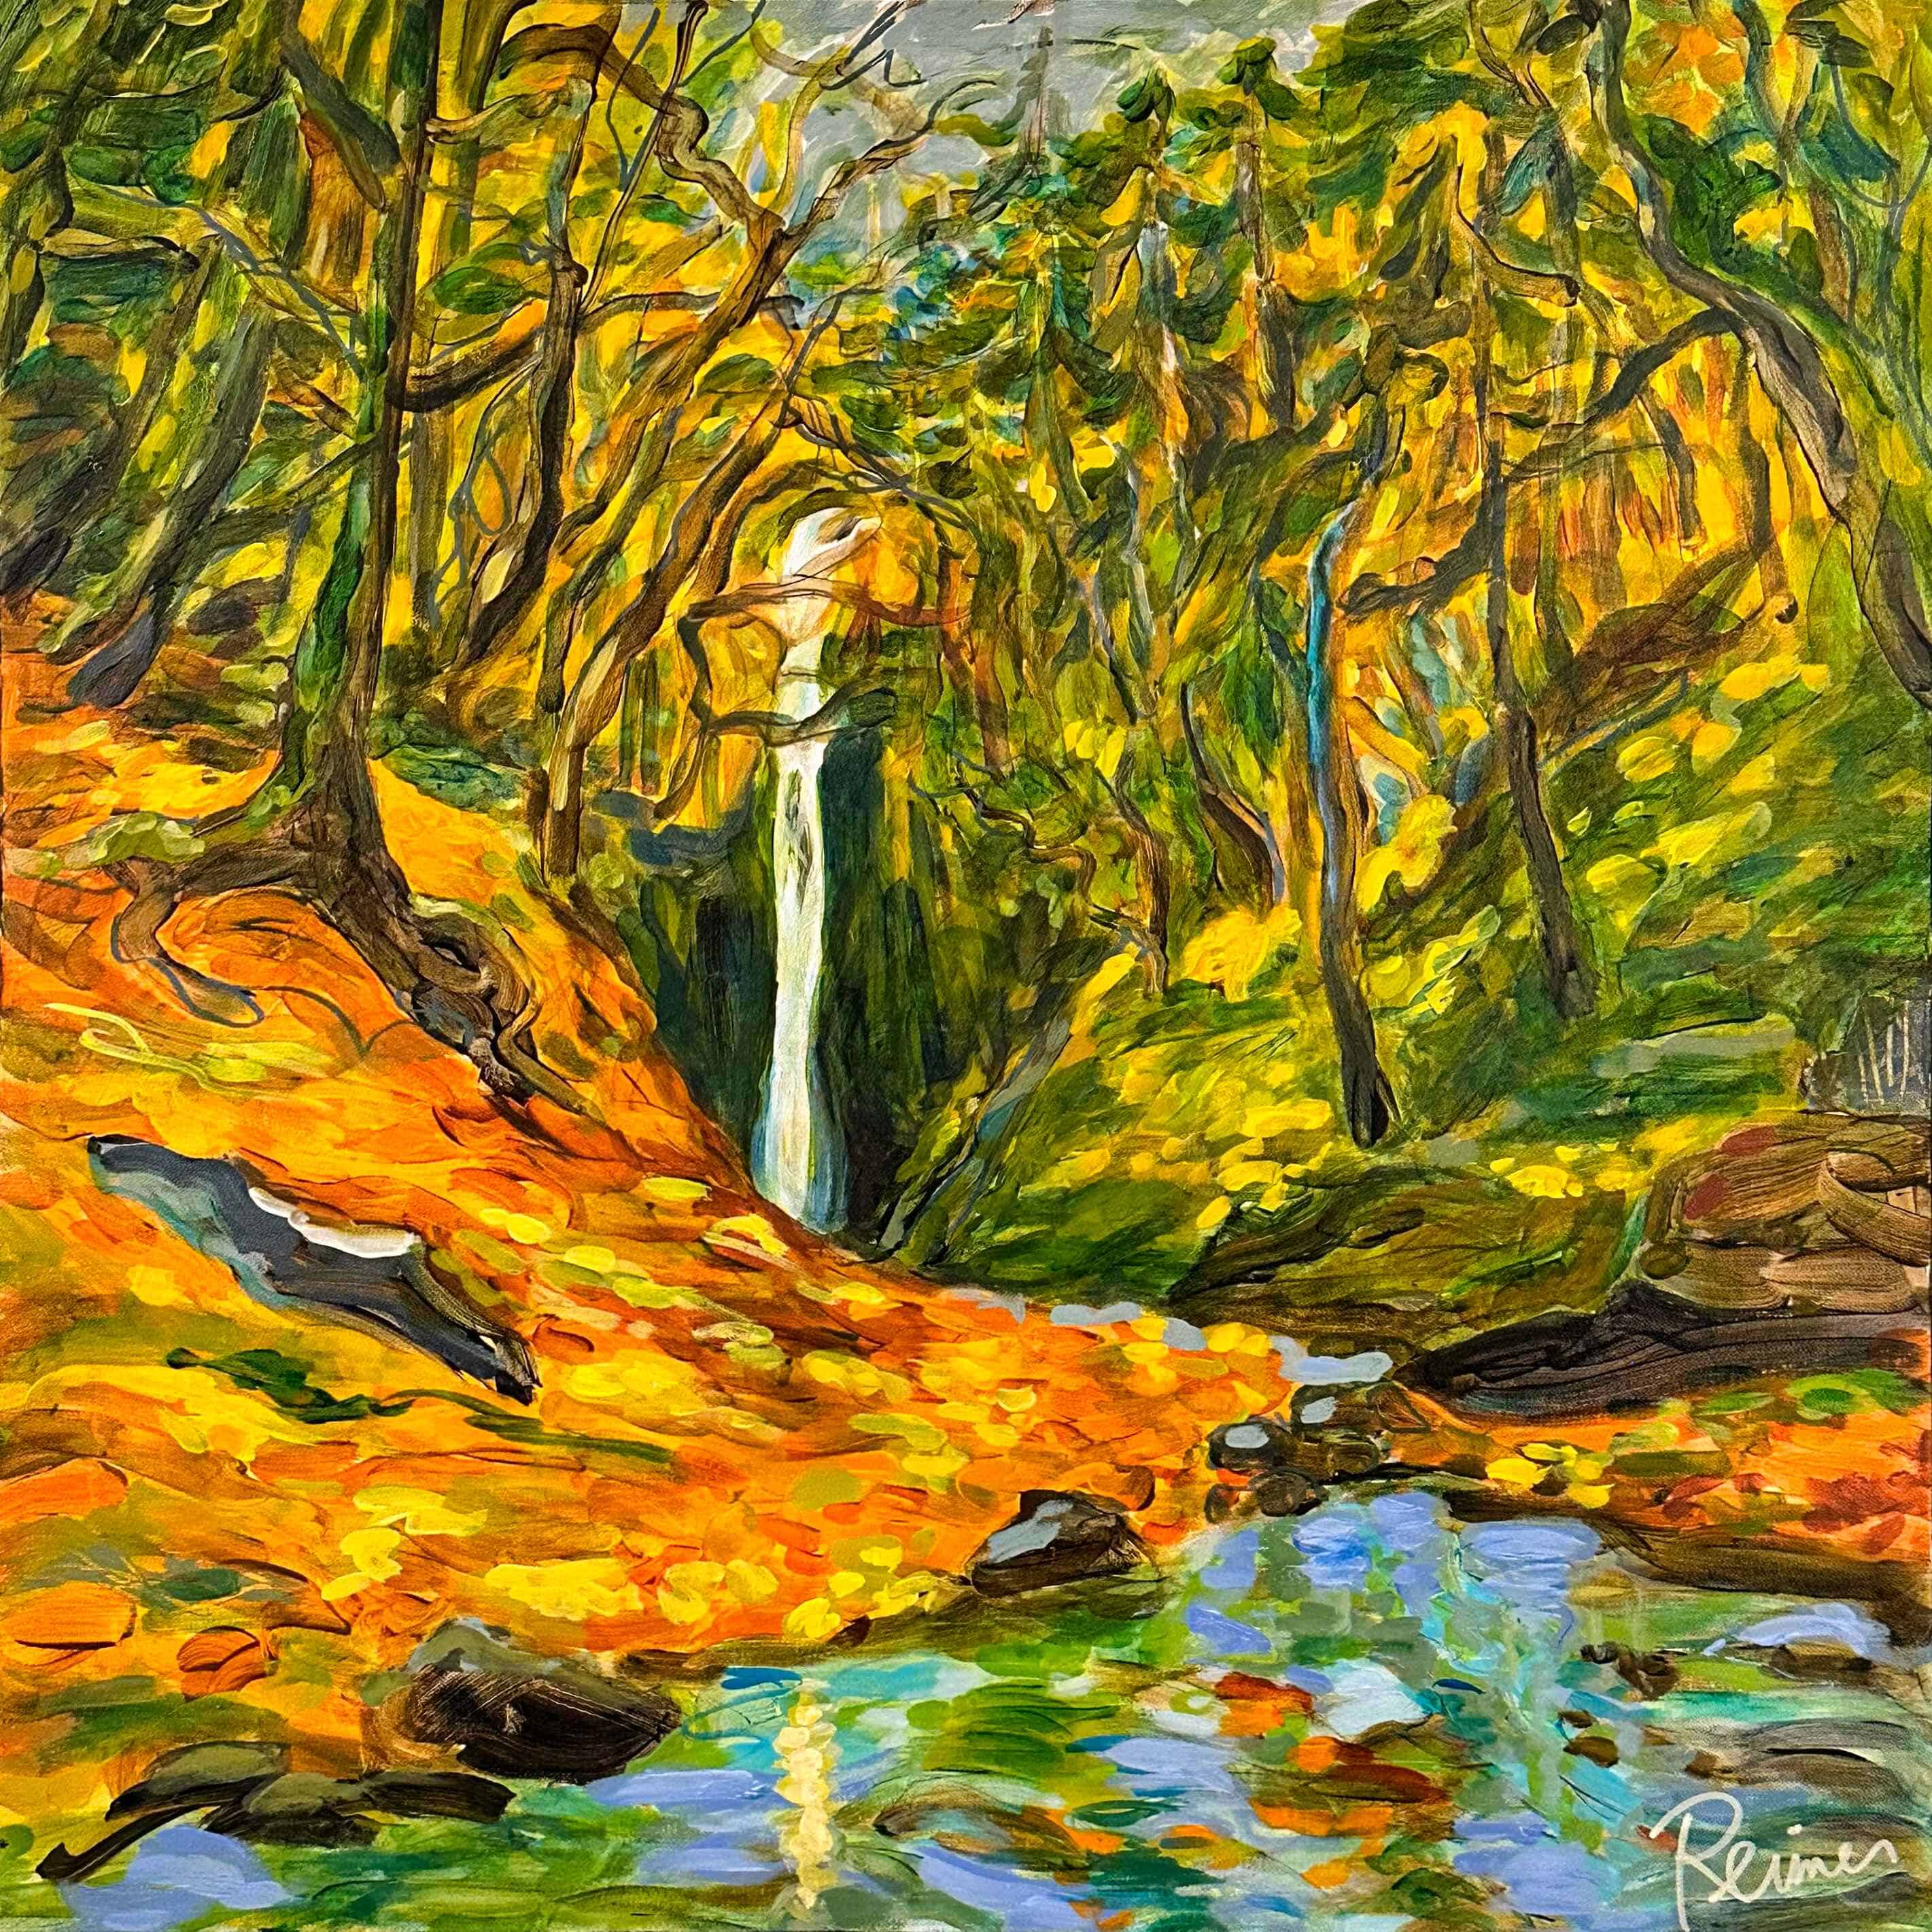 Abstract Art. Title: Goldstream in the Fall, Acrylic on Canvas, 30 x 30 in by Contemporary Canadian Artist Christine Reimer.